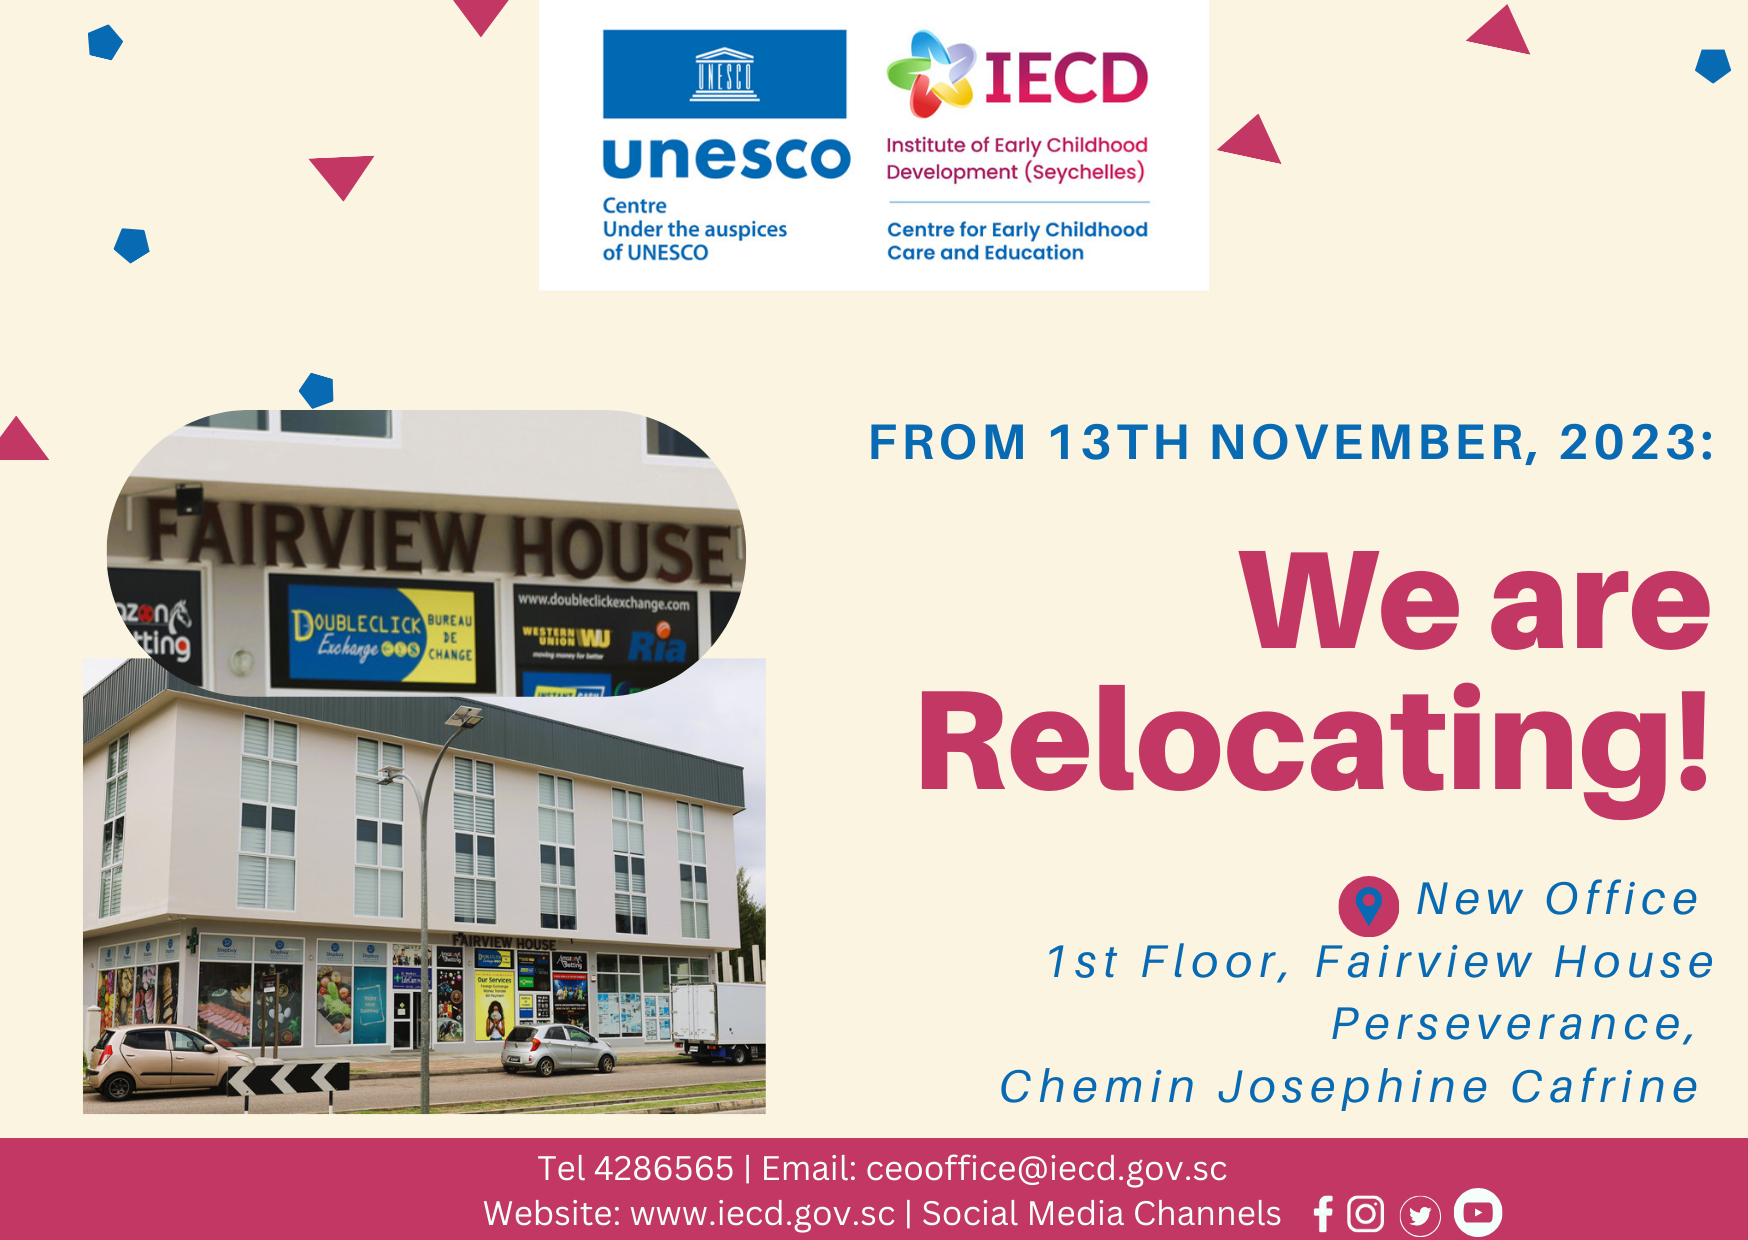 IECD OFFICE RELOCATION